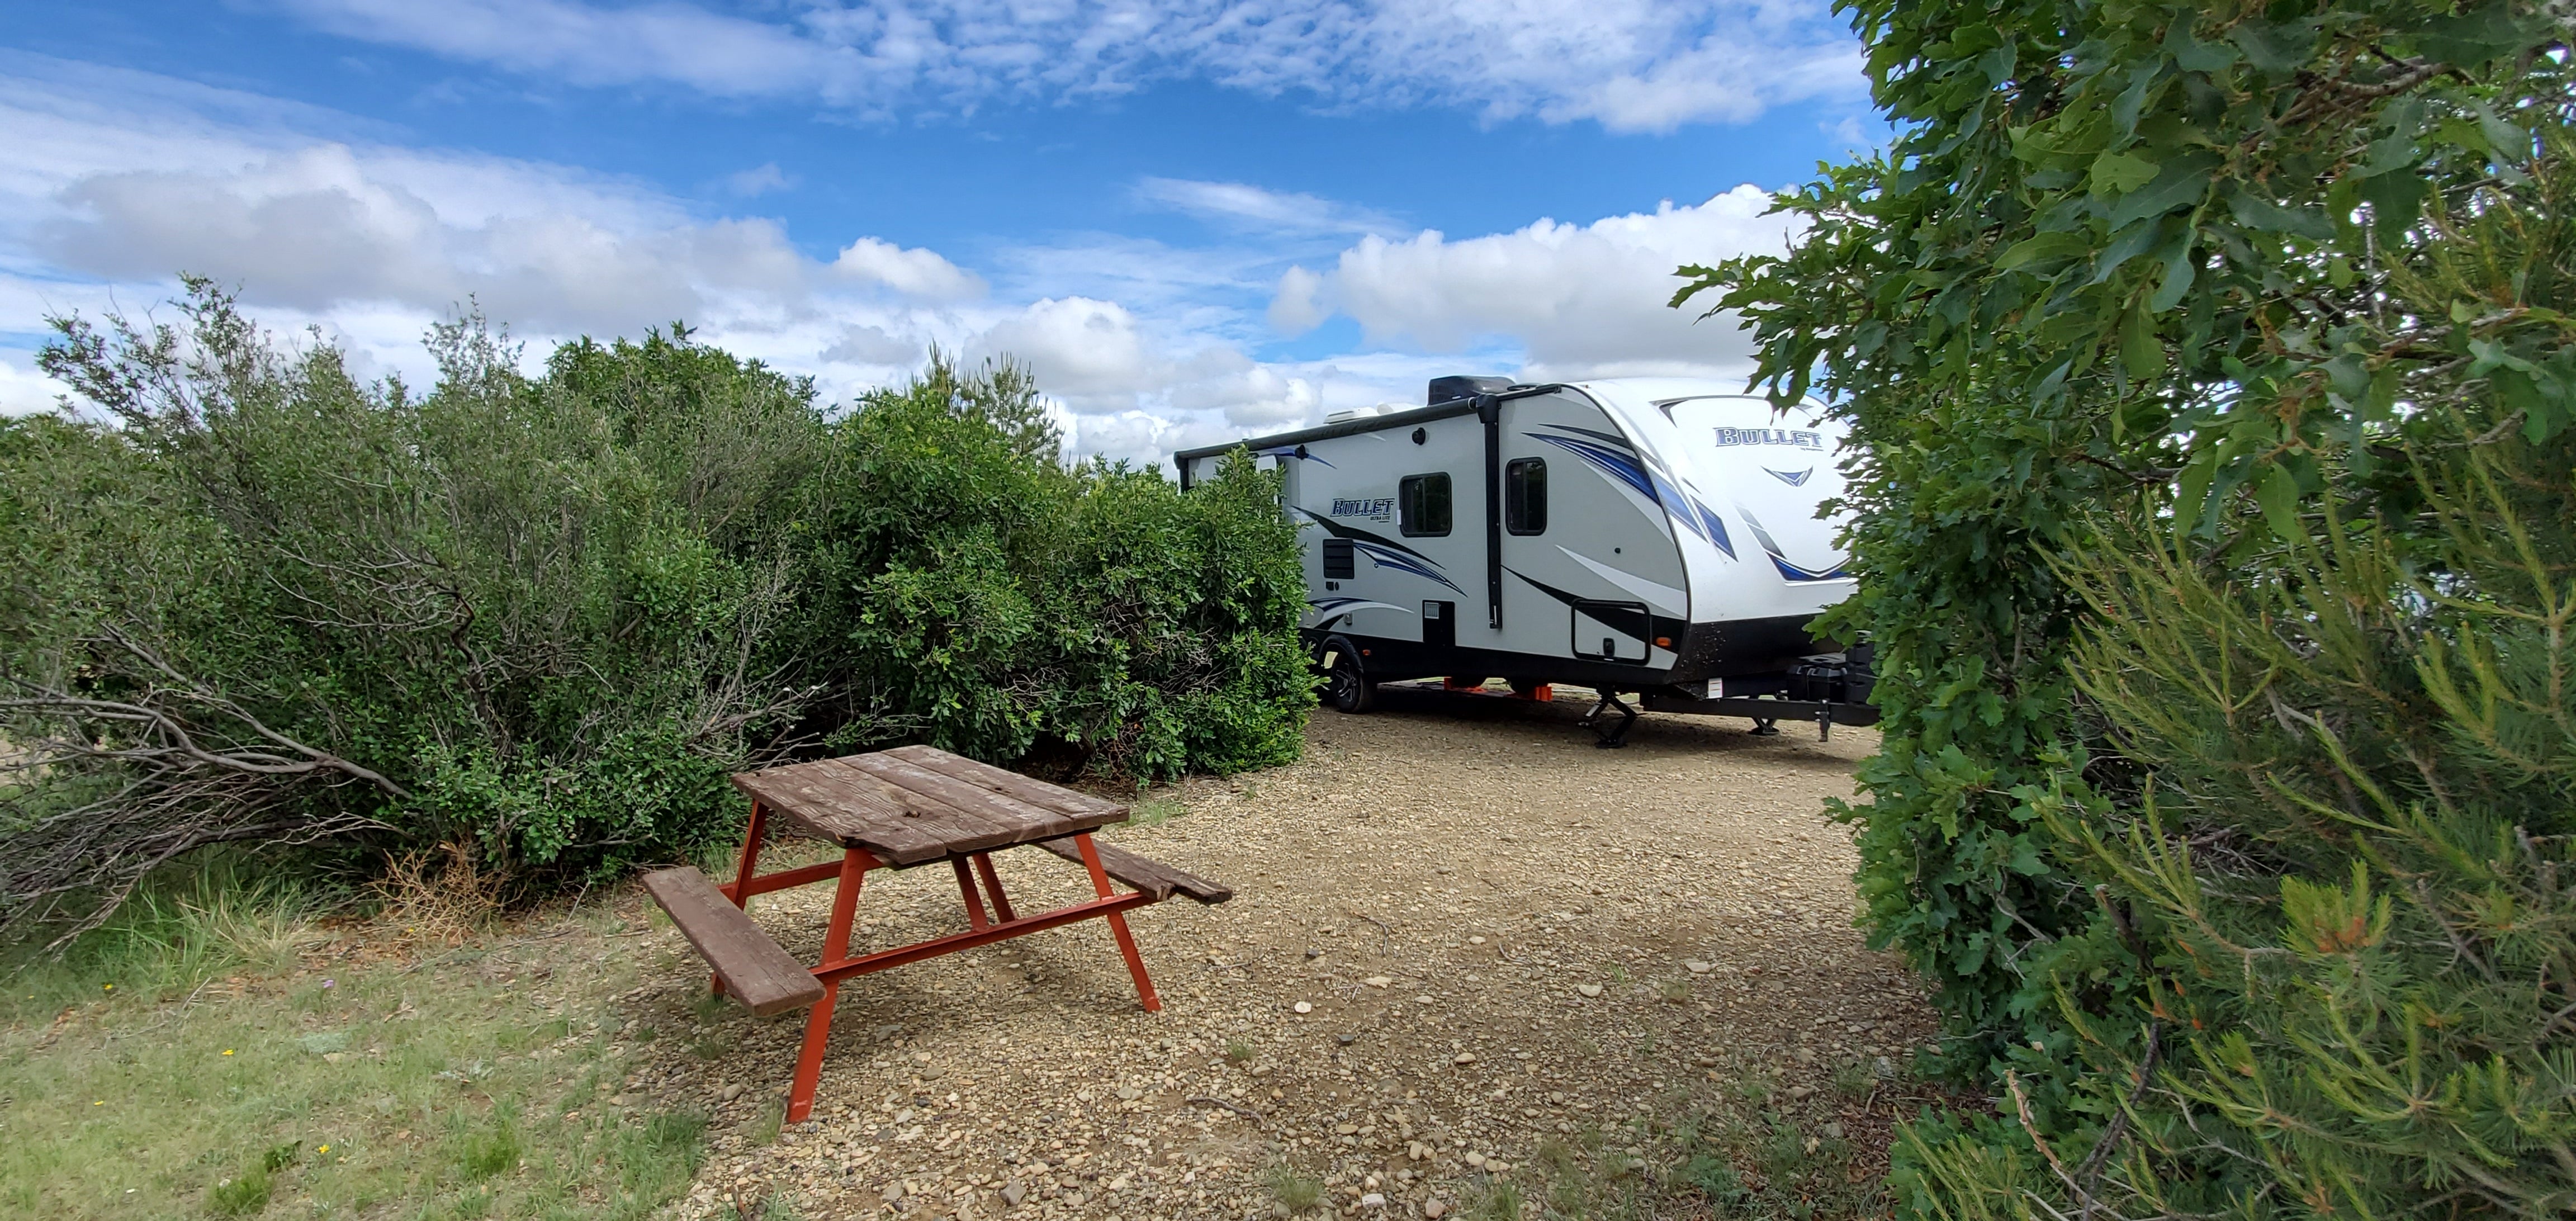 Camper submitted image from NRA Whittington Center Campground - 4